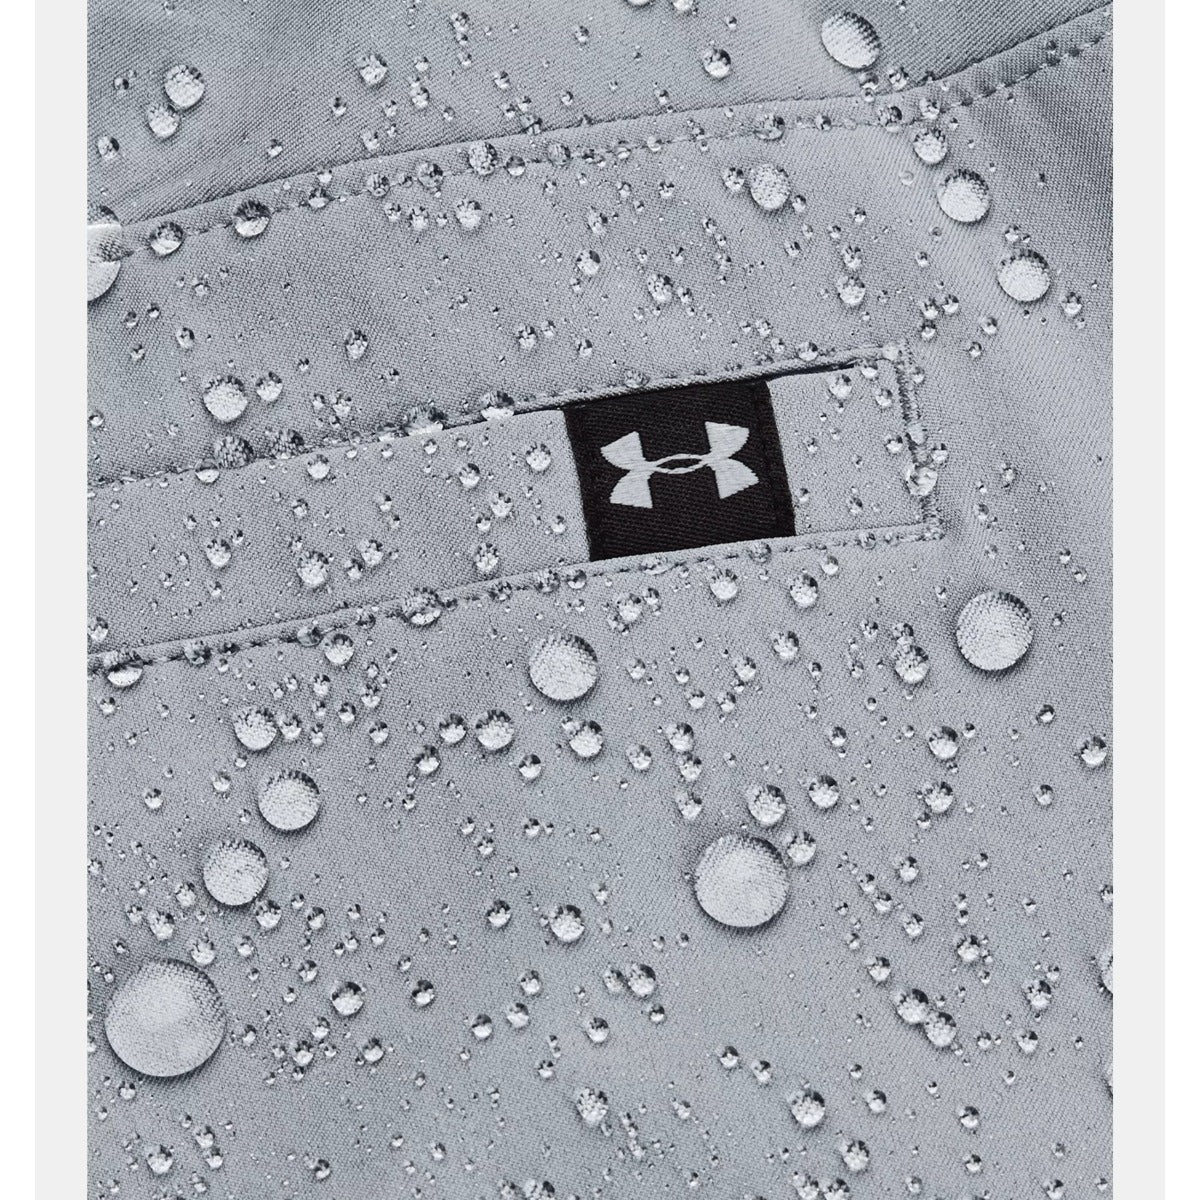 Under Armour Drive Golf Trousers Men's (Grey 036)